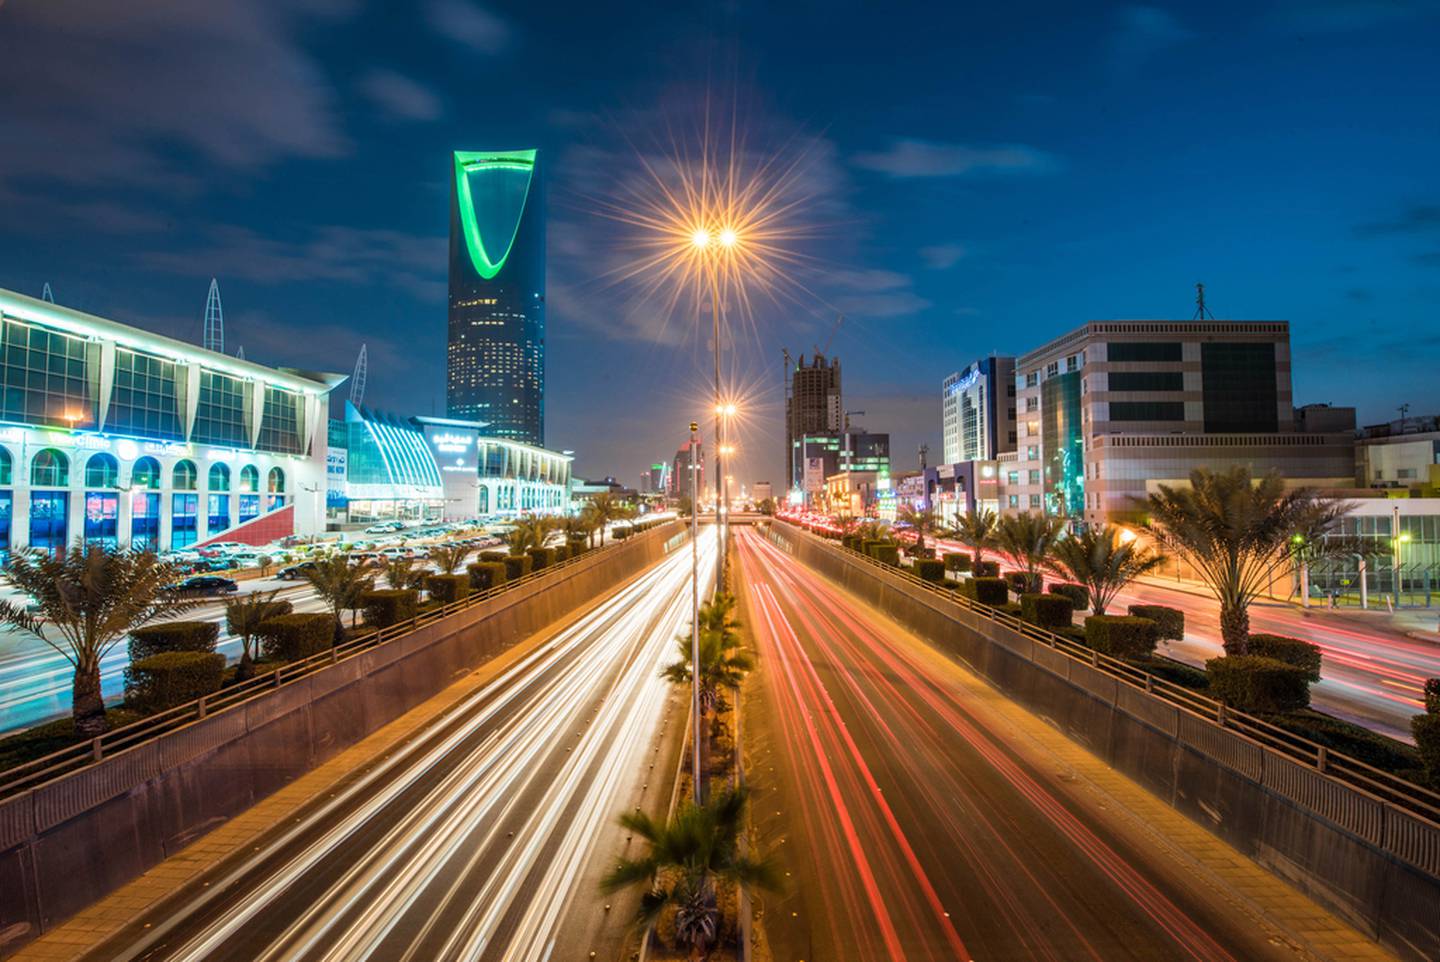 Travel and tourism leaders are convening in Riyadh for the WTTC's annual summit under the theme Travel for a better future. Photo: Bloomberg